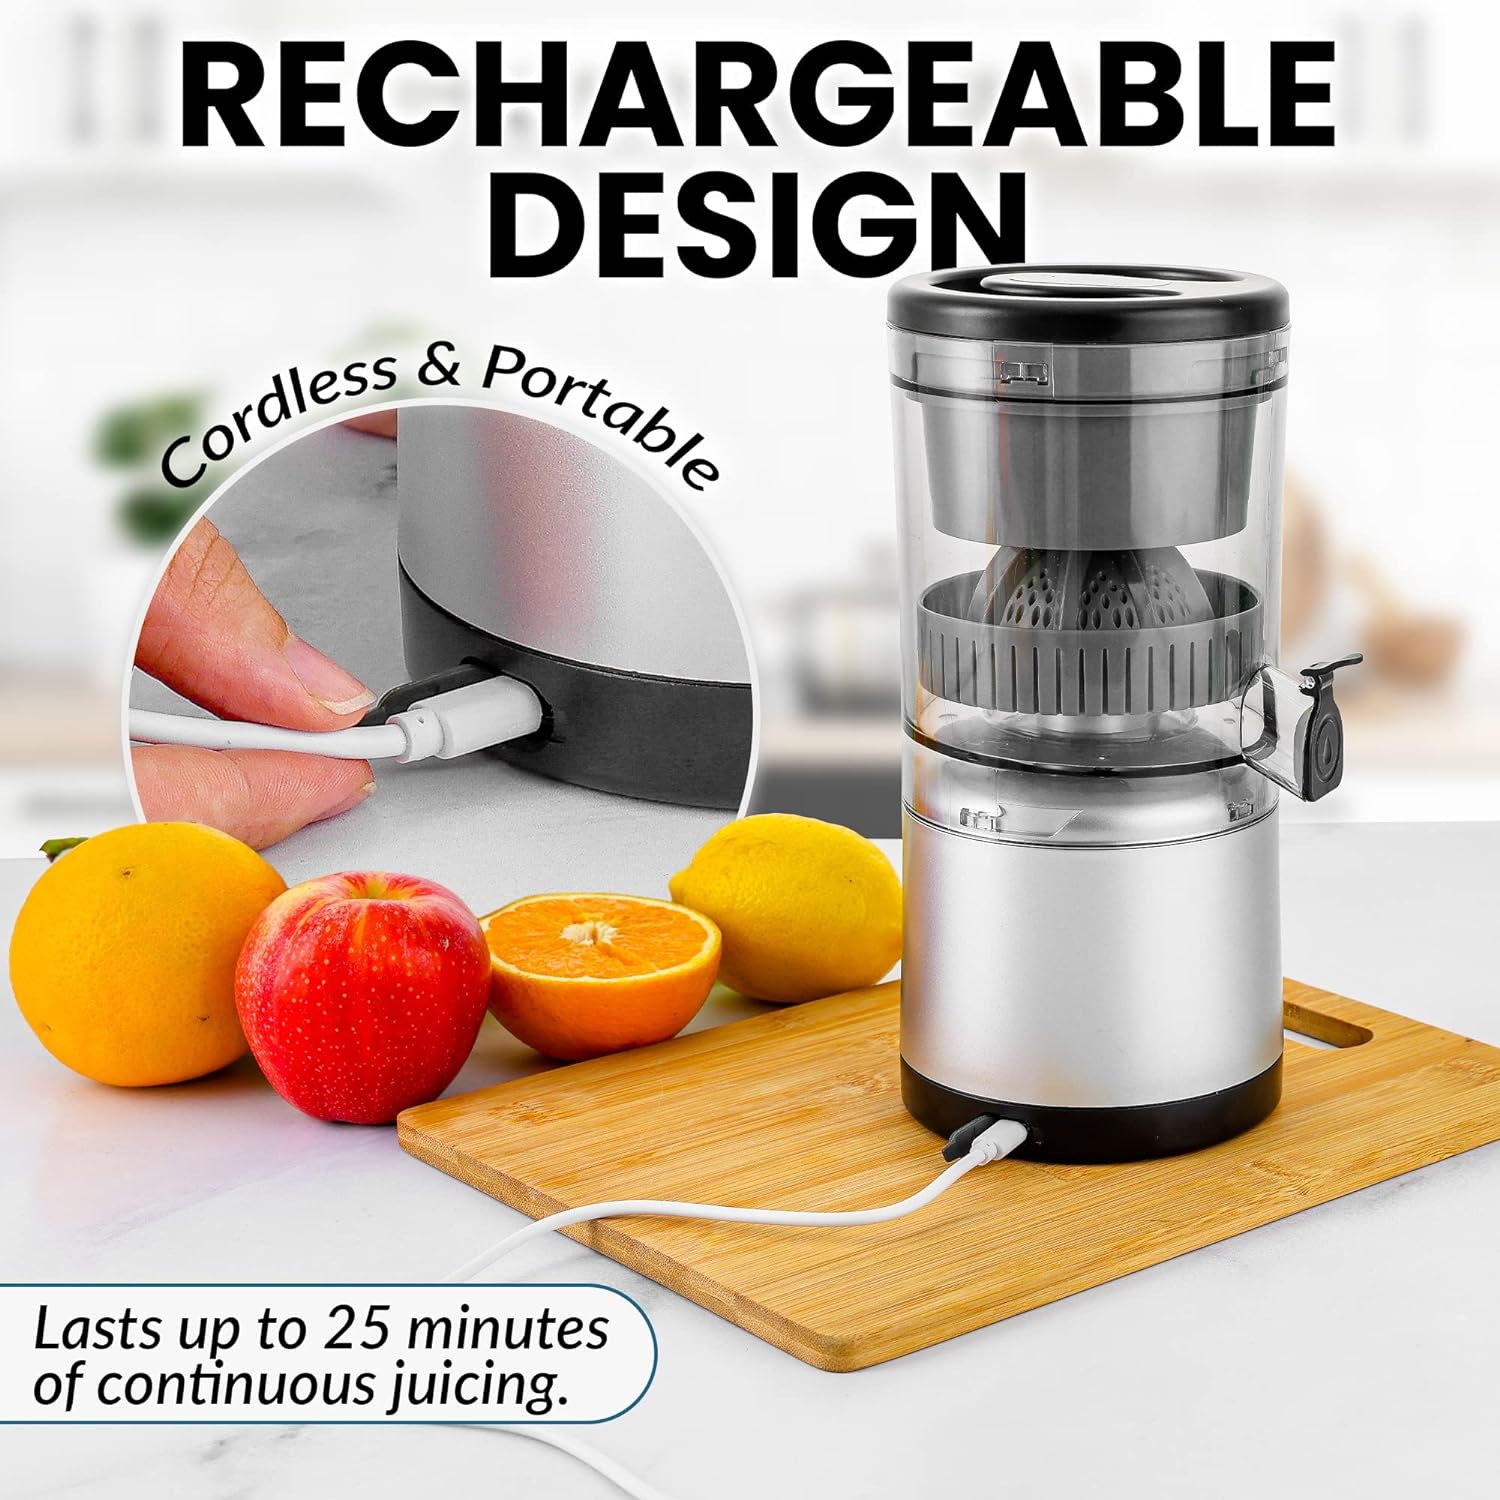  Zulay Kitchen Juice Vortex Lemon & Orange Juicer - Electric  Citrus Squeezer & Presser - Rechargeable Juicer Machine - Wireless Portable  Juicer - USB Charger & Cleaning Brush Included (Black/Silver): Home